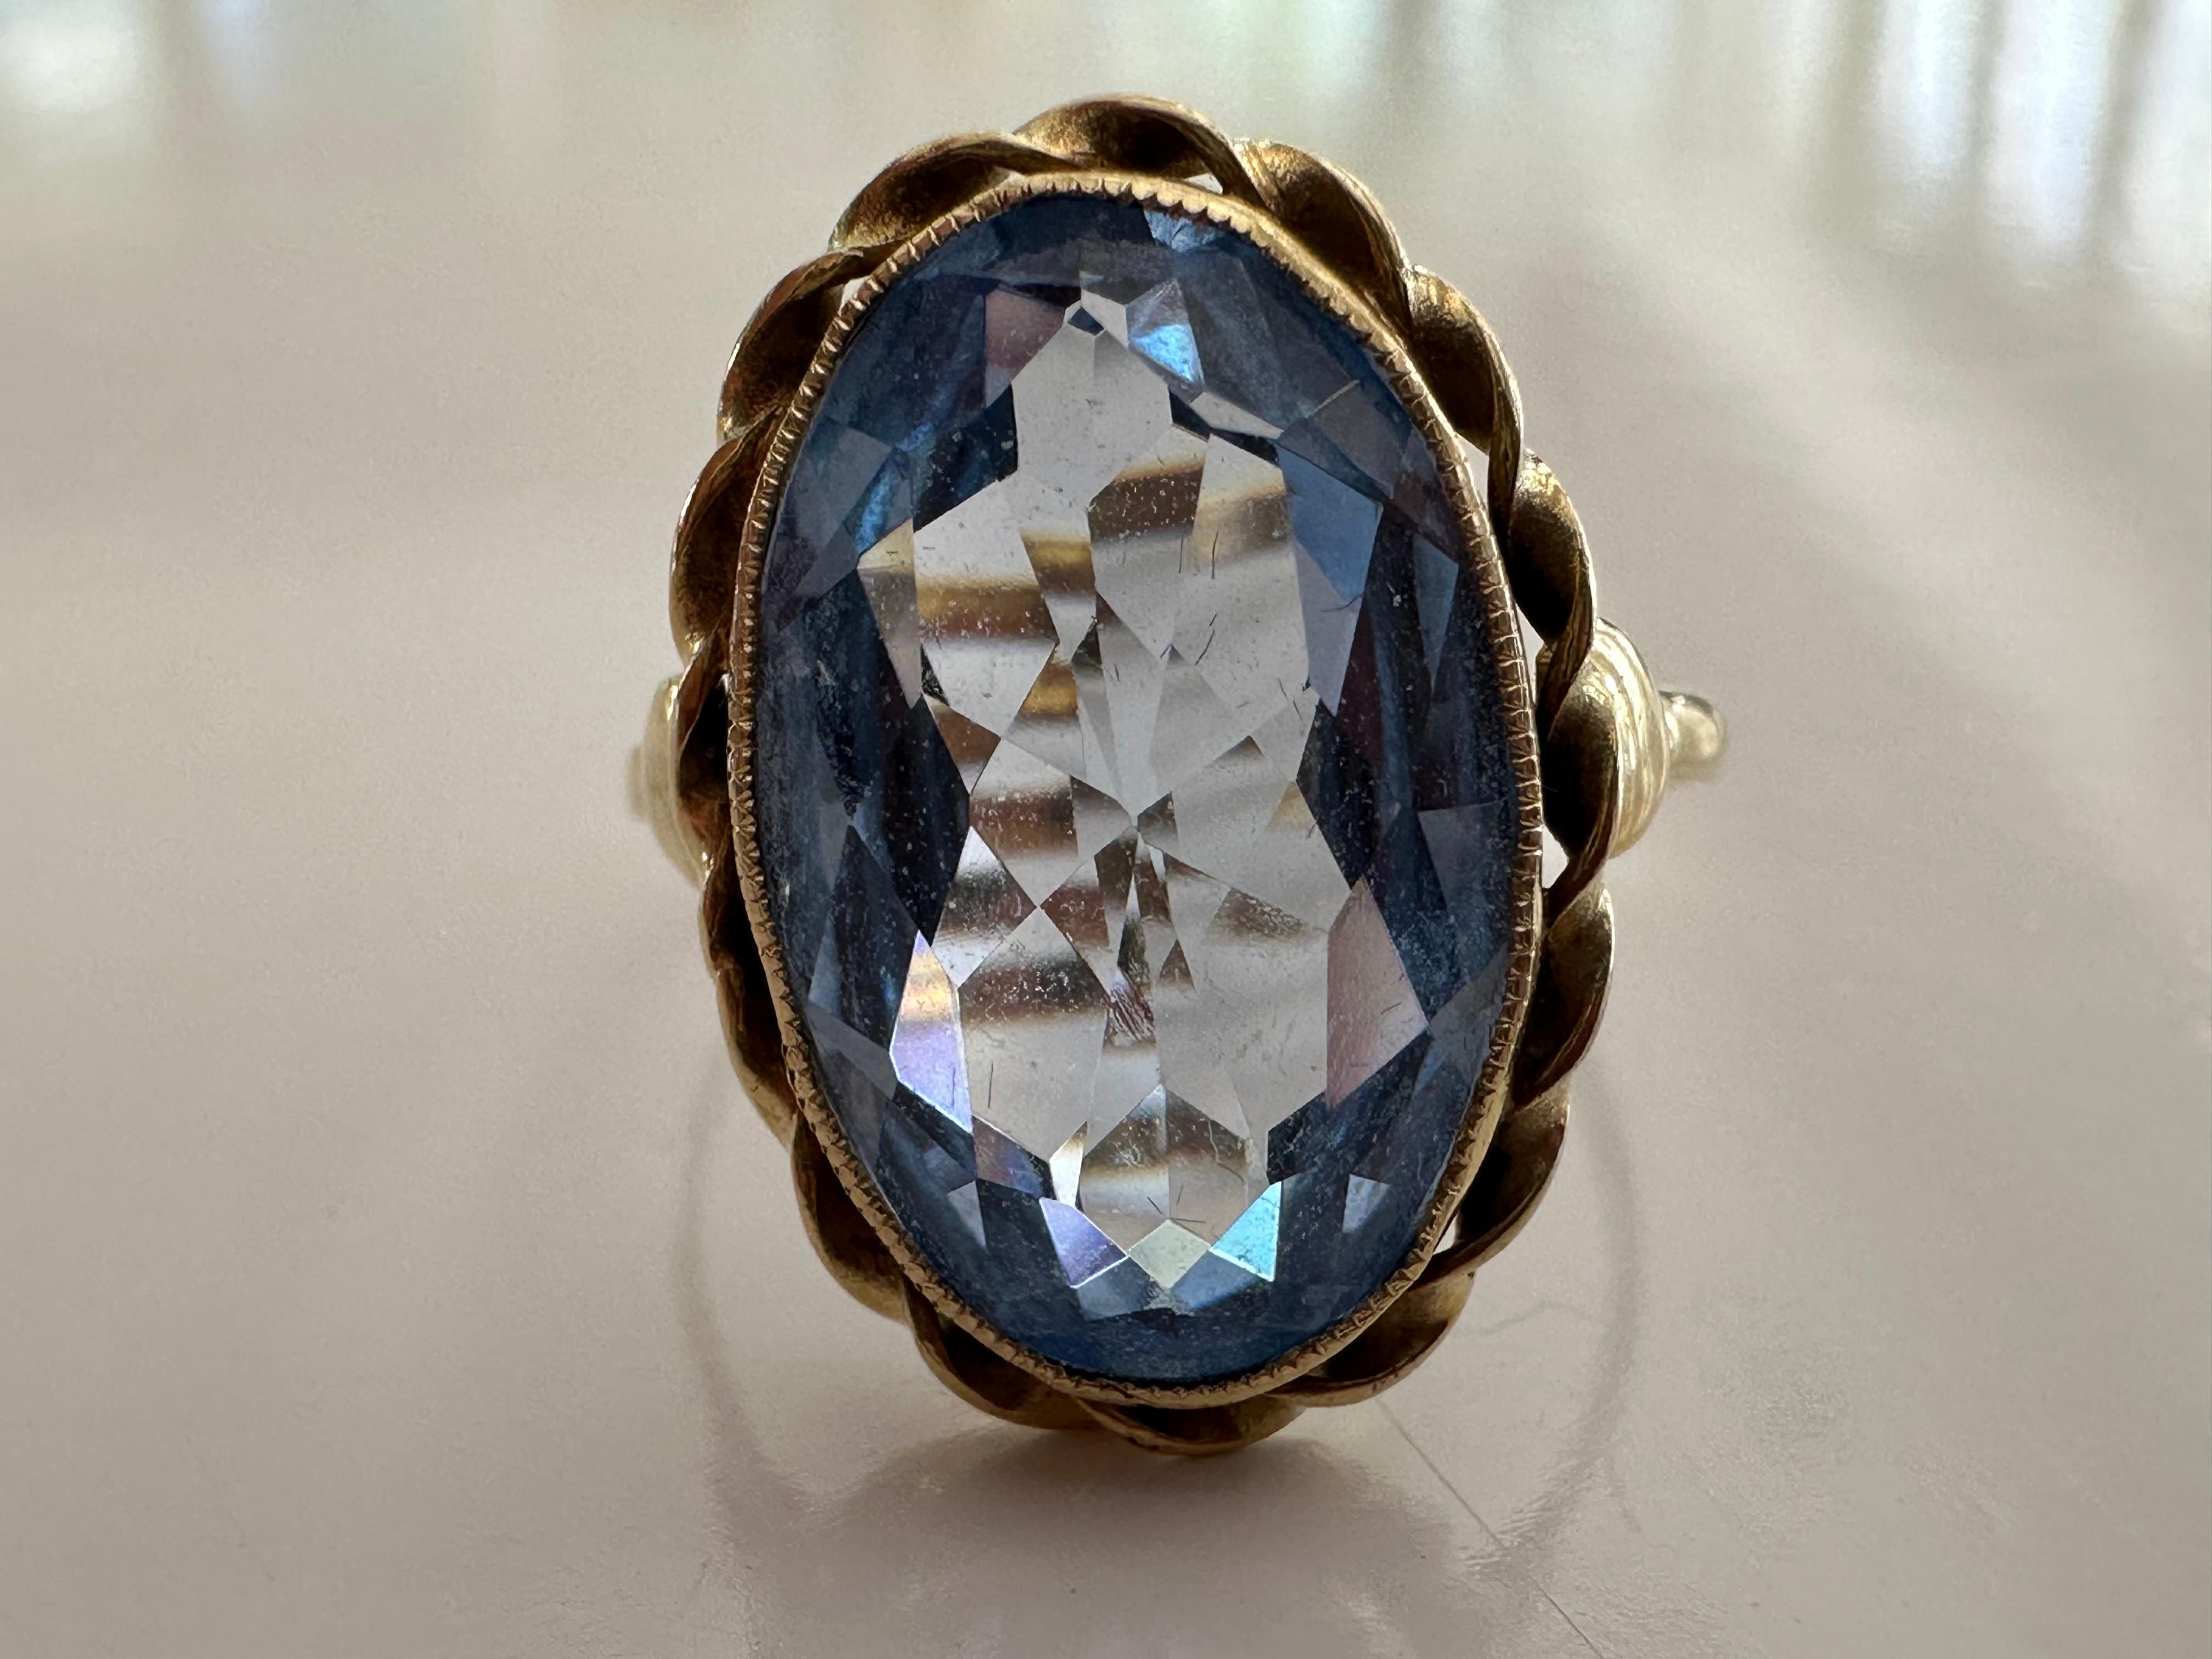 A stunning oval shaped synthetic light blue spinel radiates from within a delicate band fashioned from 14kt yellow gold encircled by a rope design and milgraining. 
